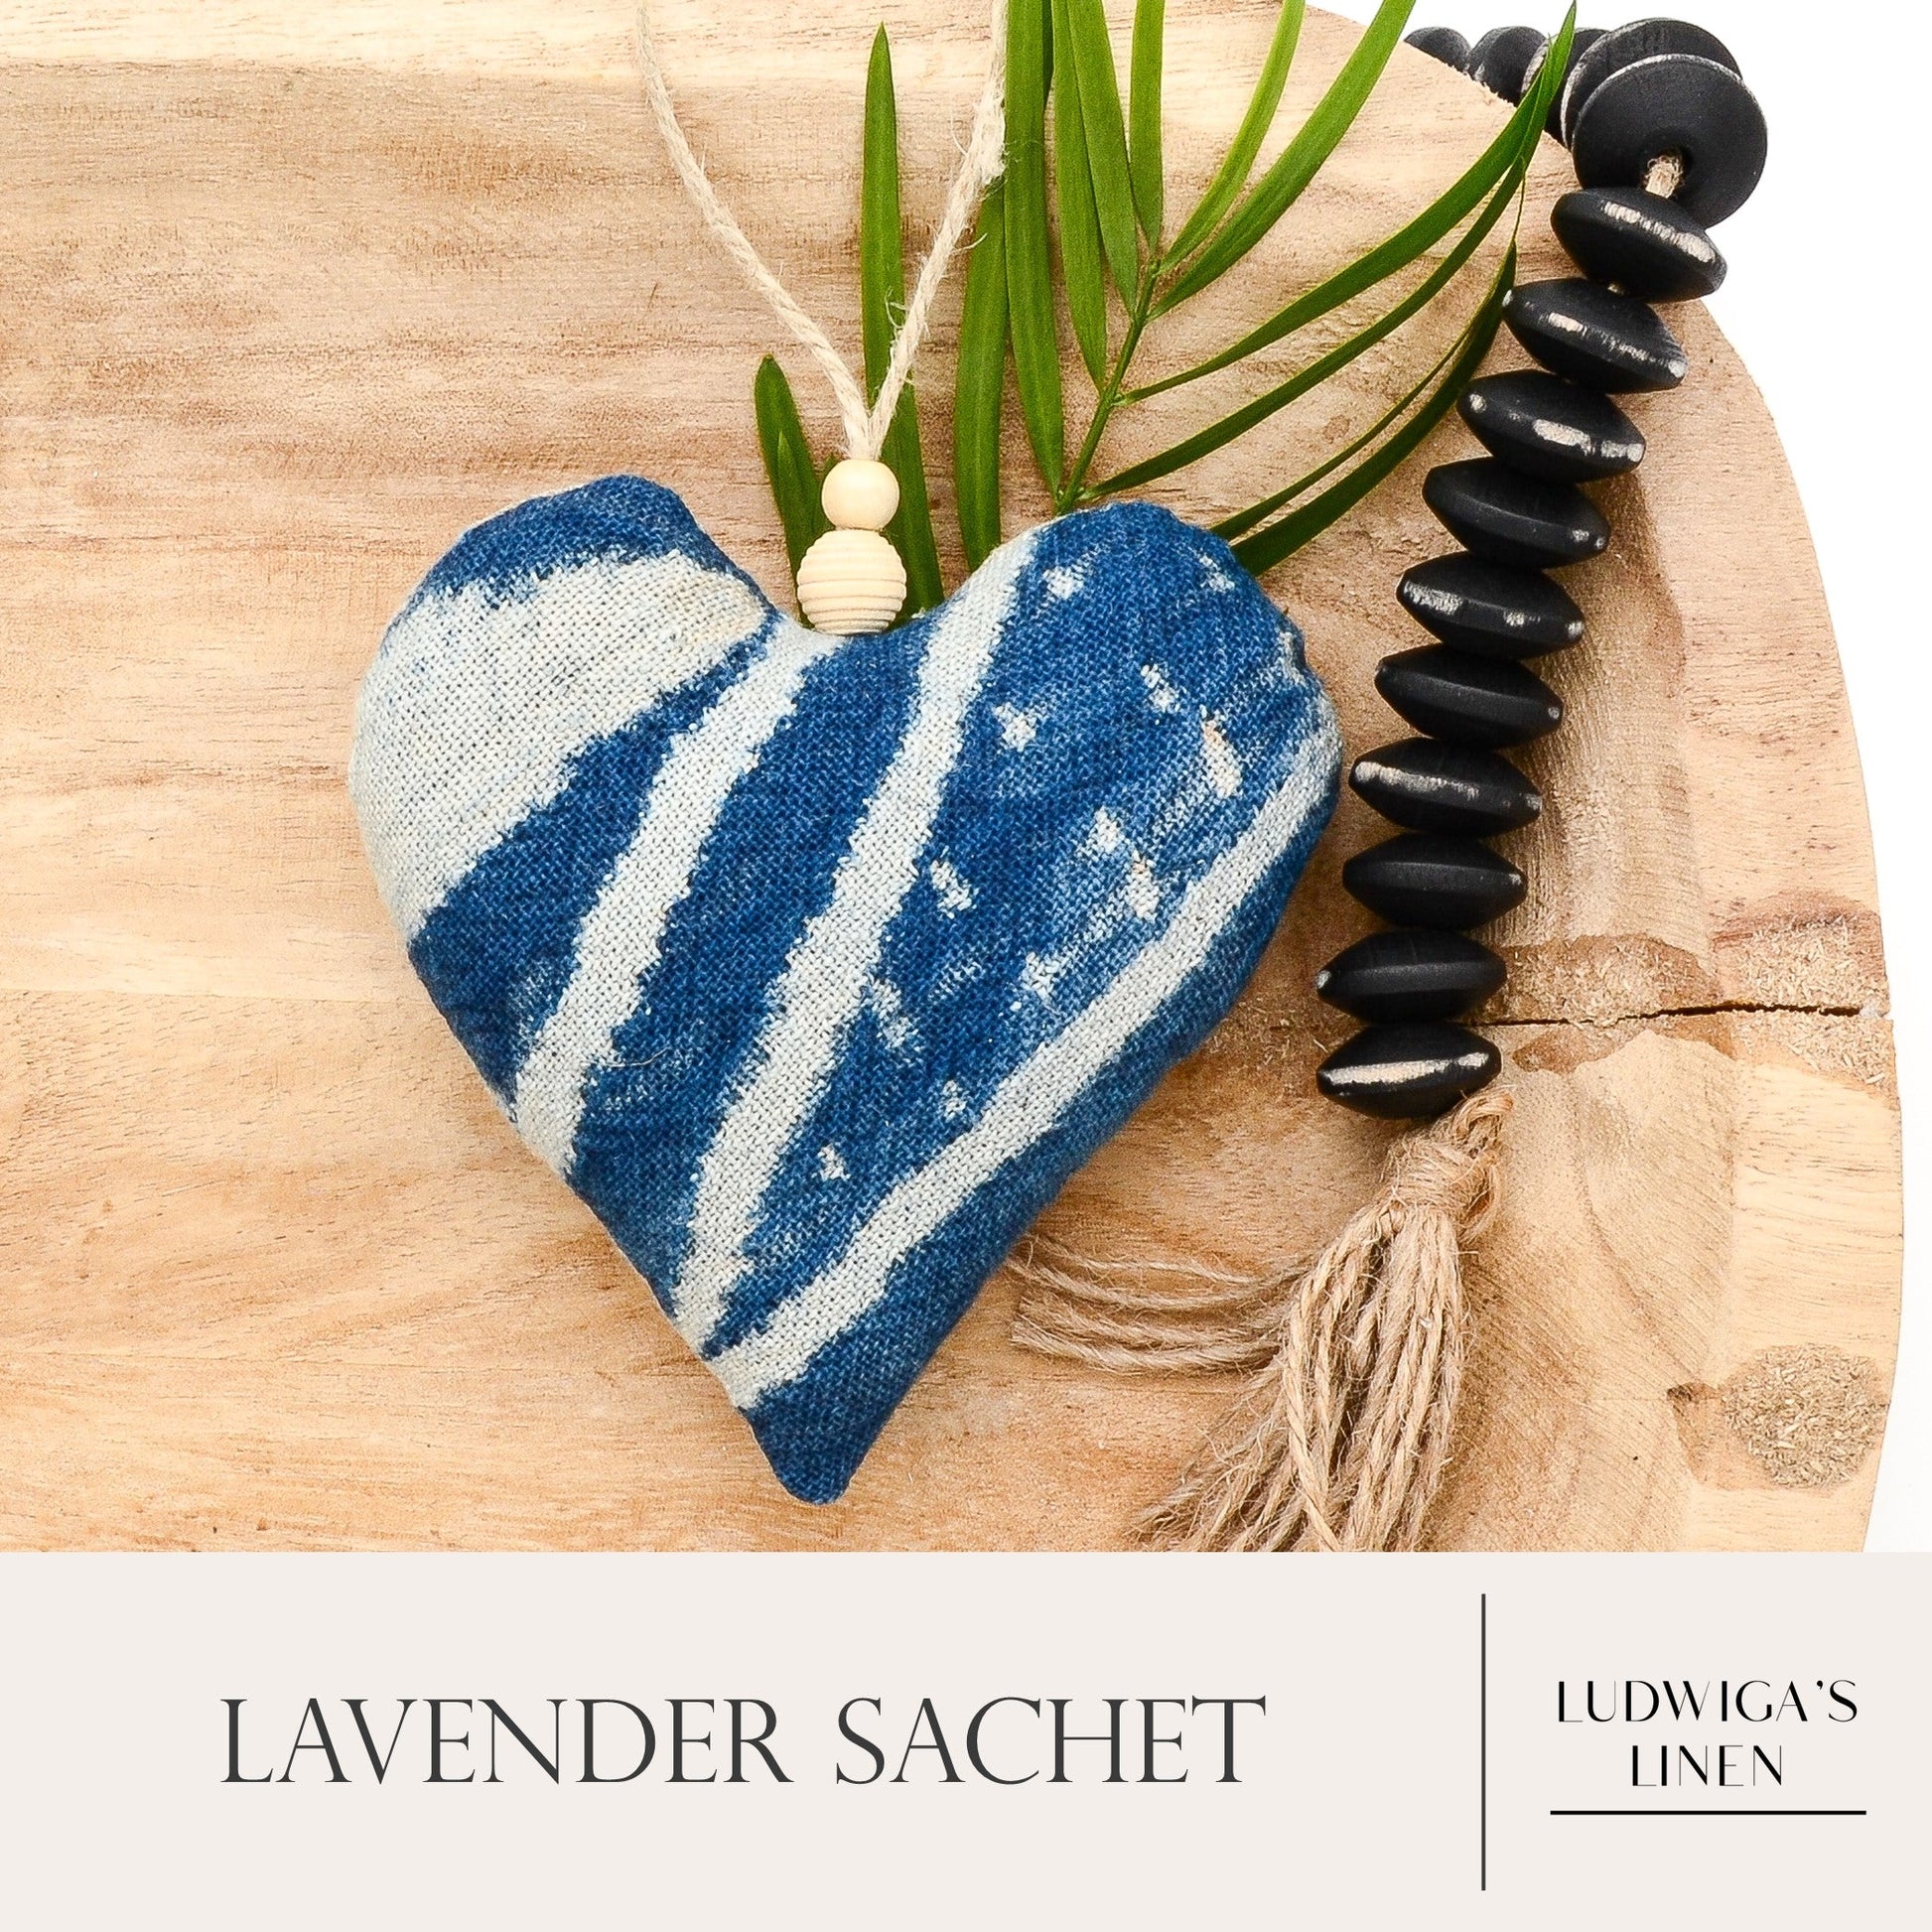 Lavender sachet heart made from handwoven African Ndop cotton, hemp twine tie with wooden beads, and filled with high quality lavender from Provence France